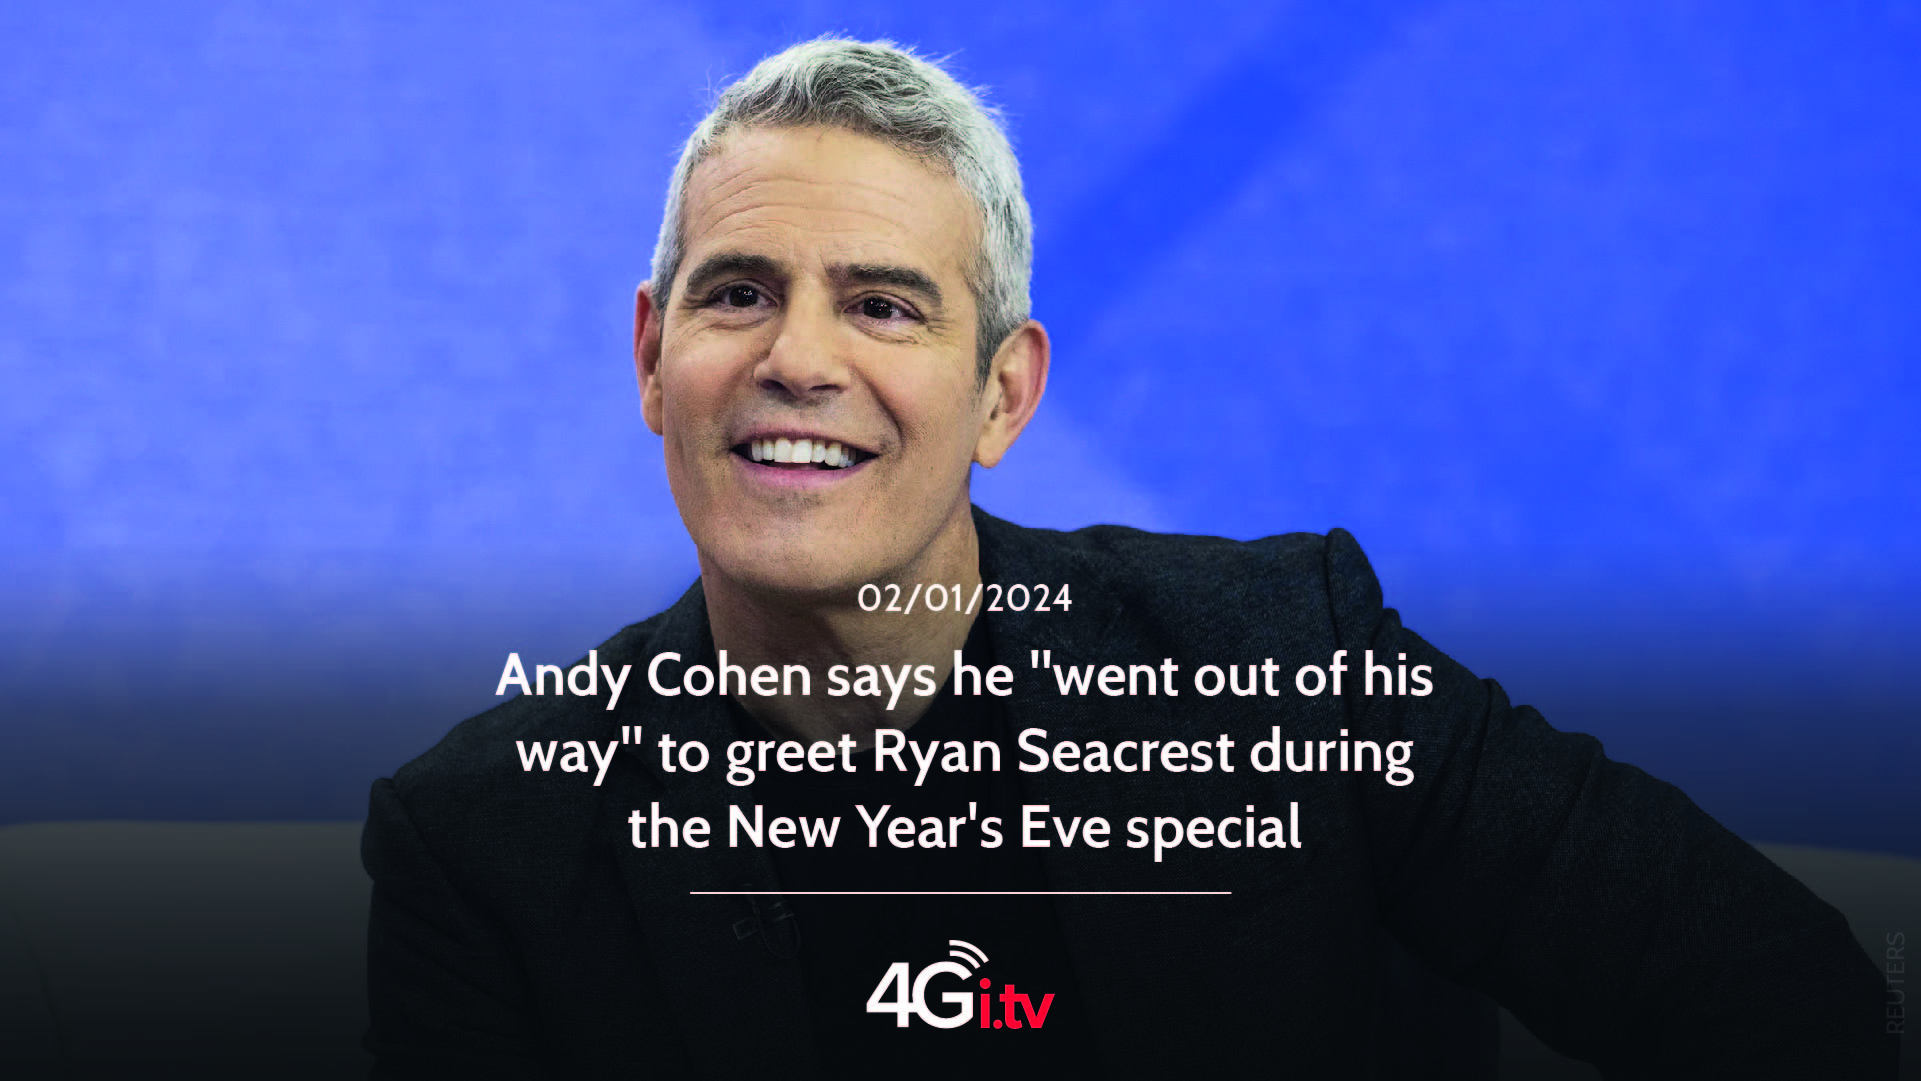 Lee más sobre el artículo Andy Cohen says he “went out of his way” to greet Ryan Seacrest during the New Year’s Eve special